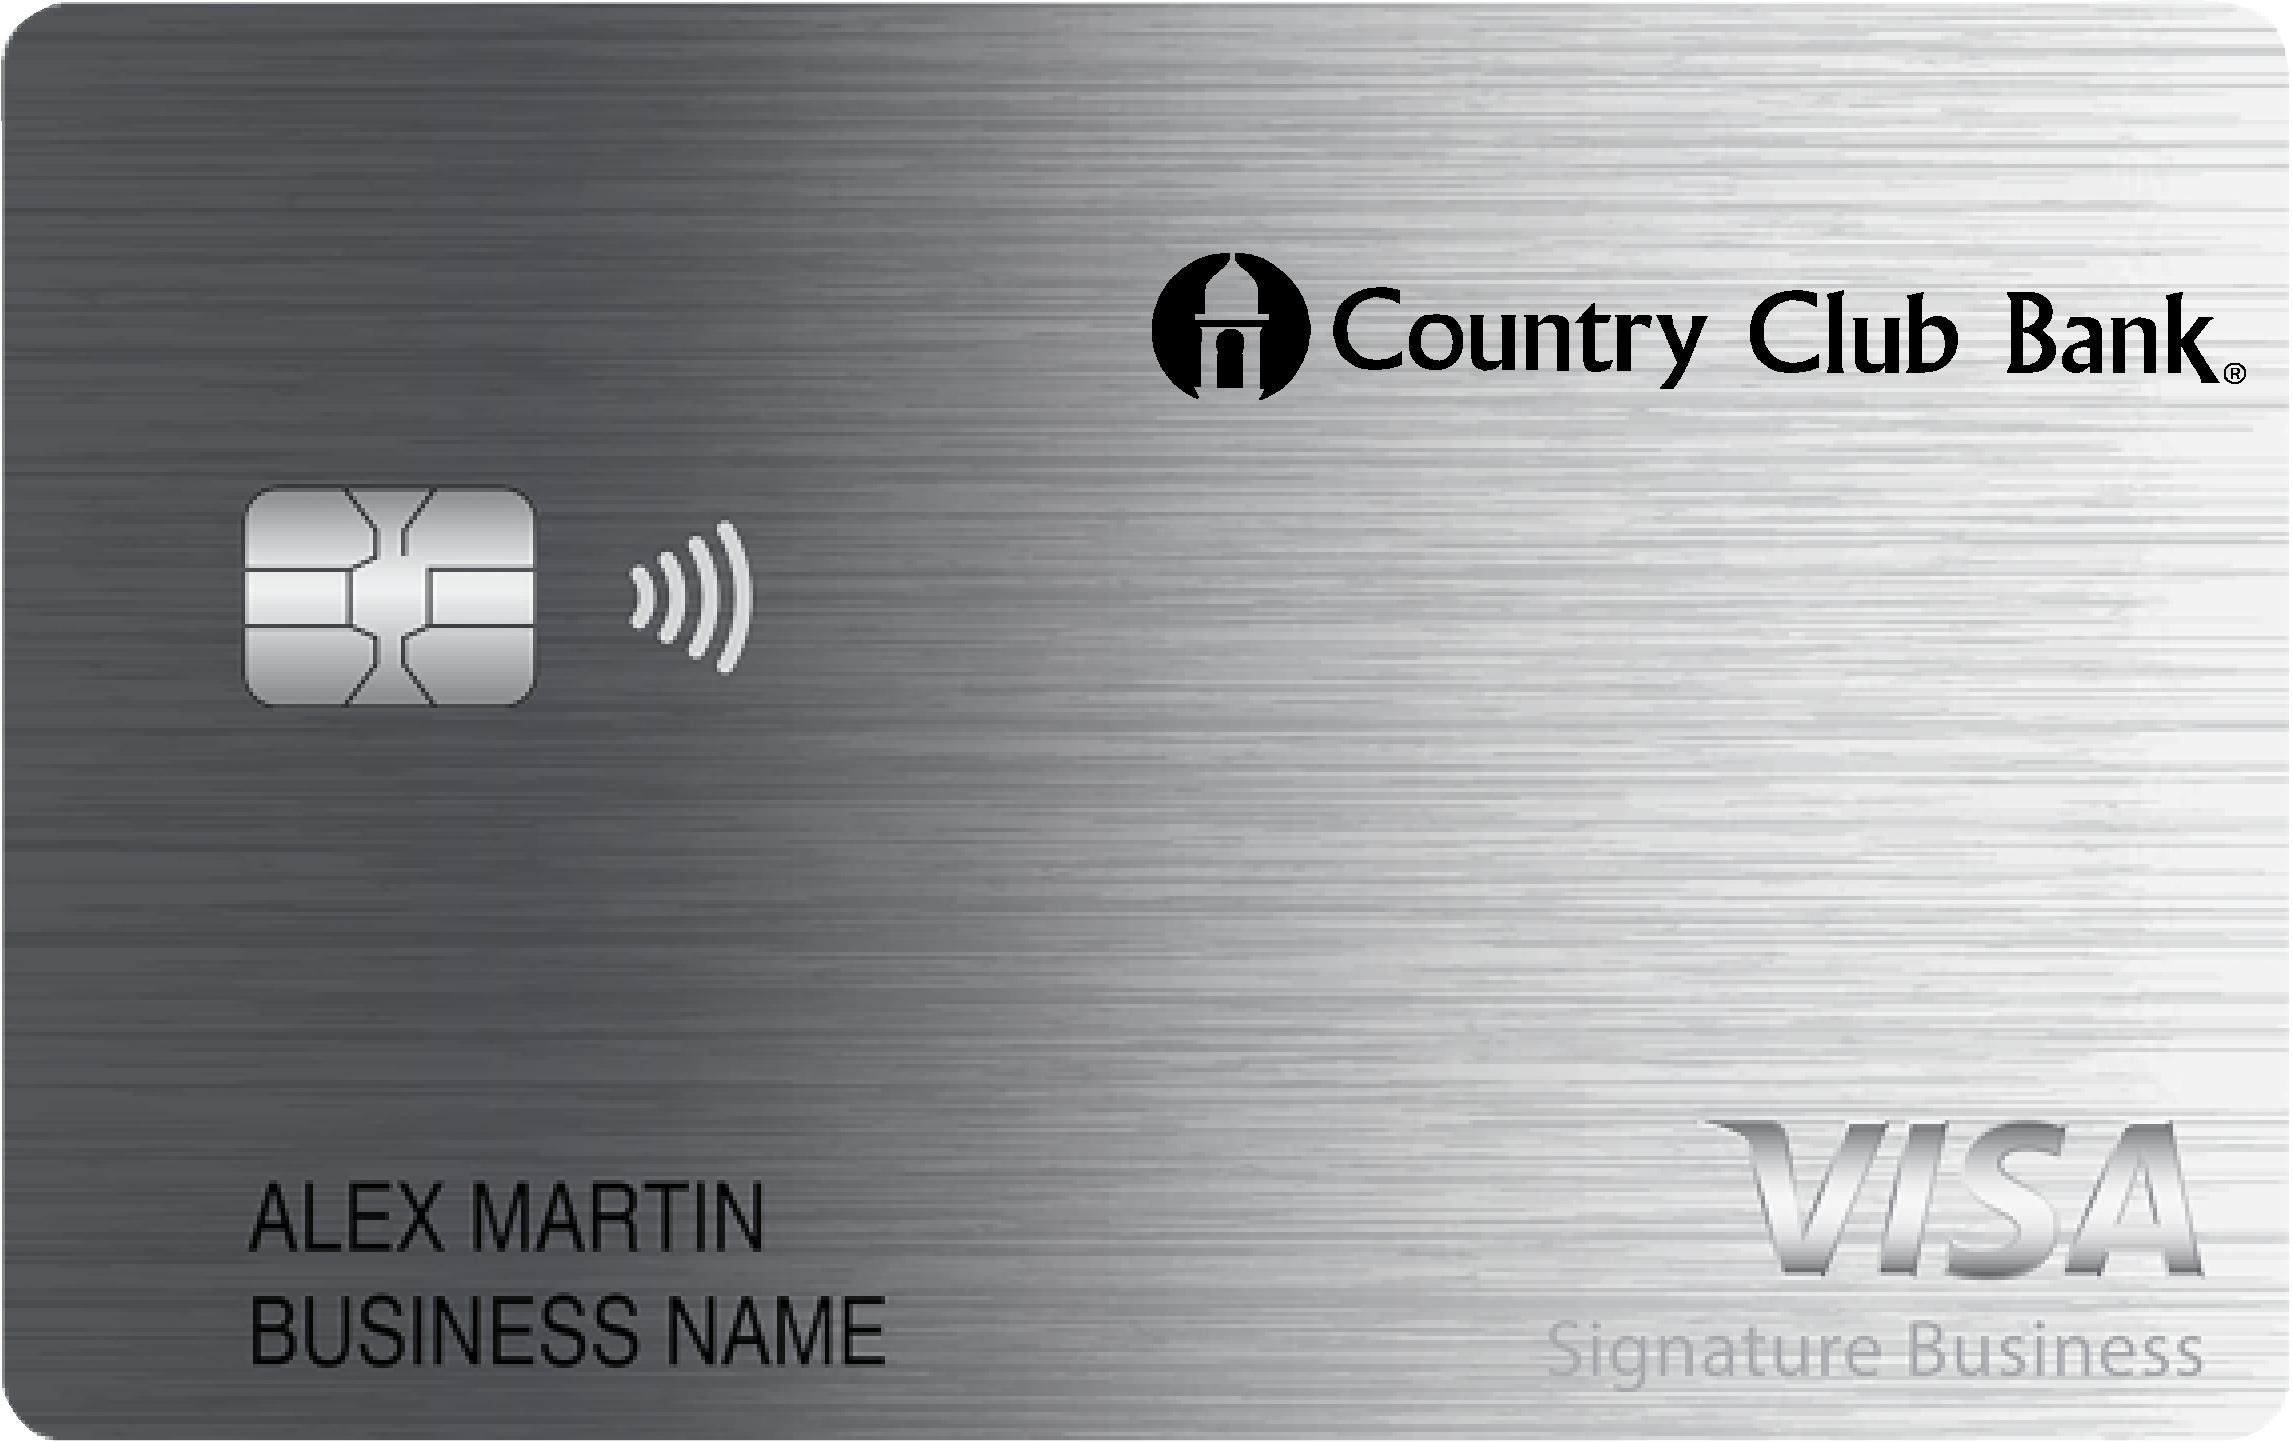 Country Club Bank Smart Business Rewards Card